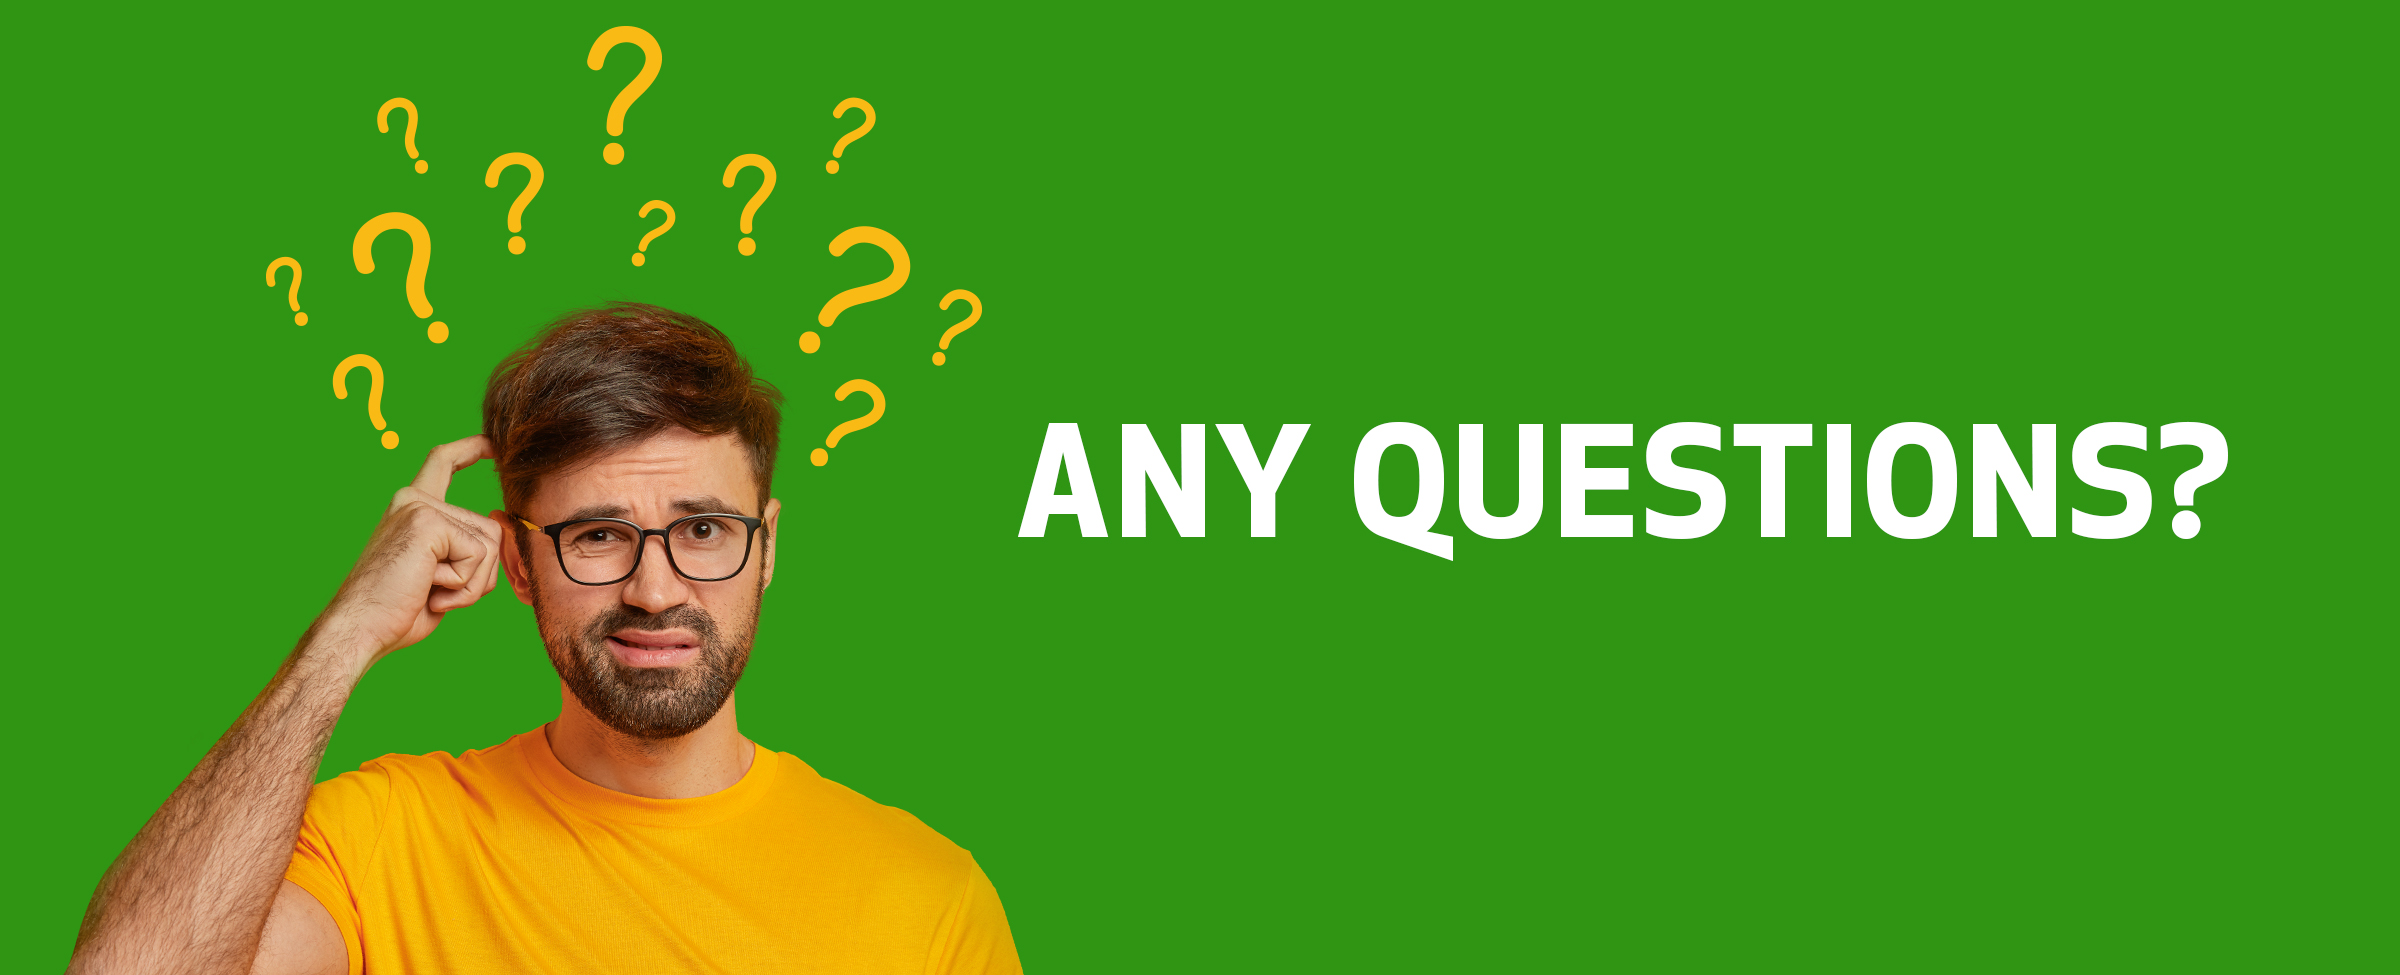 Do you have any questions? Good! Read Joe’s FAQs to answer any burning questions you may have.